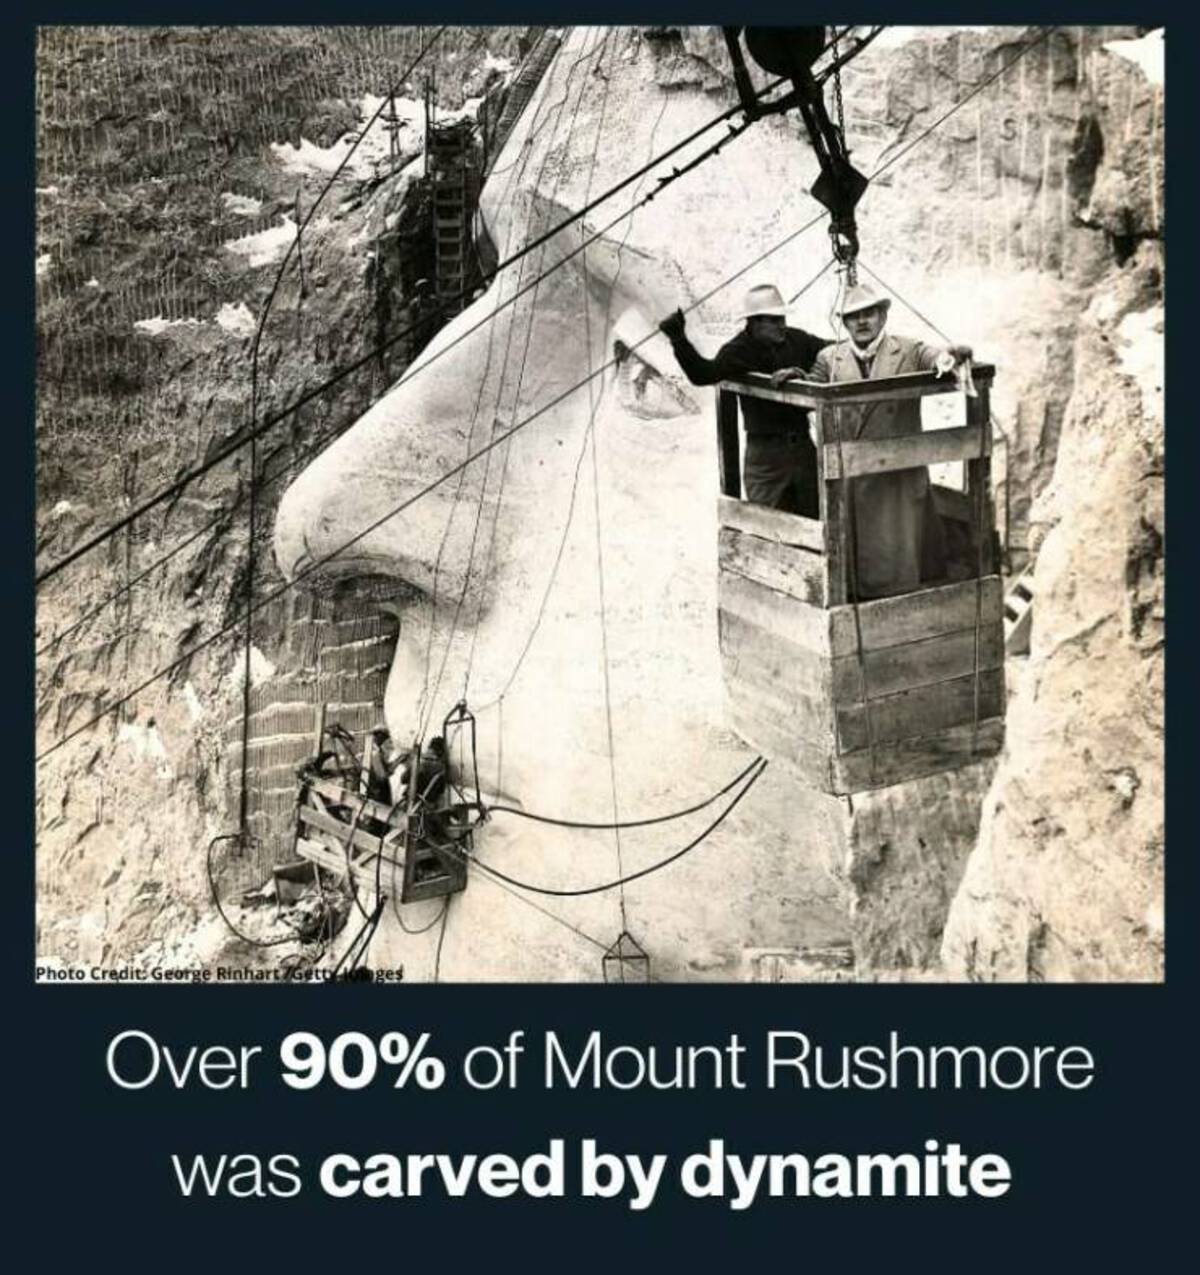 mt rushmore in progress - Photo Credit George RinhartGettges 50 Over 90% of Mount Rushmore was carved by dynamite